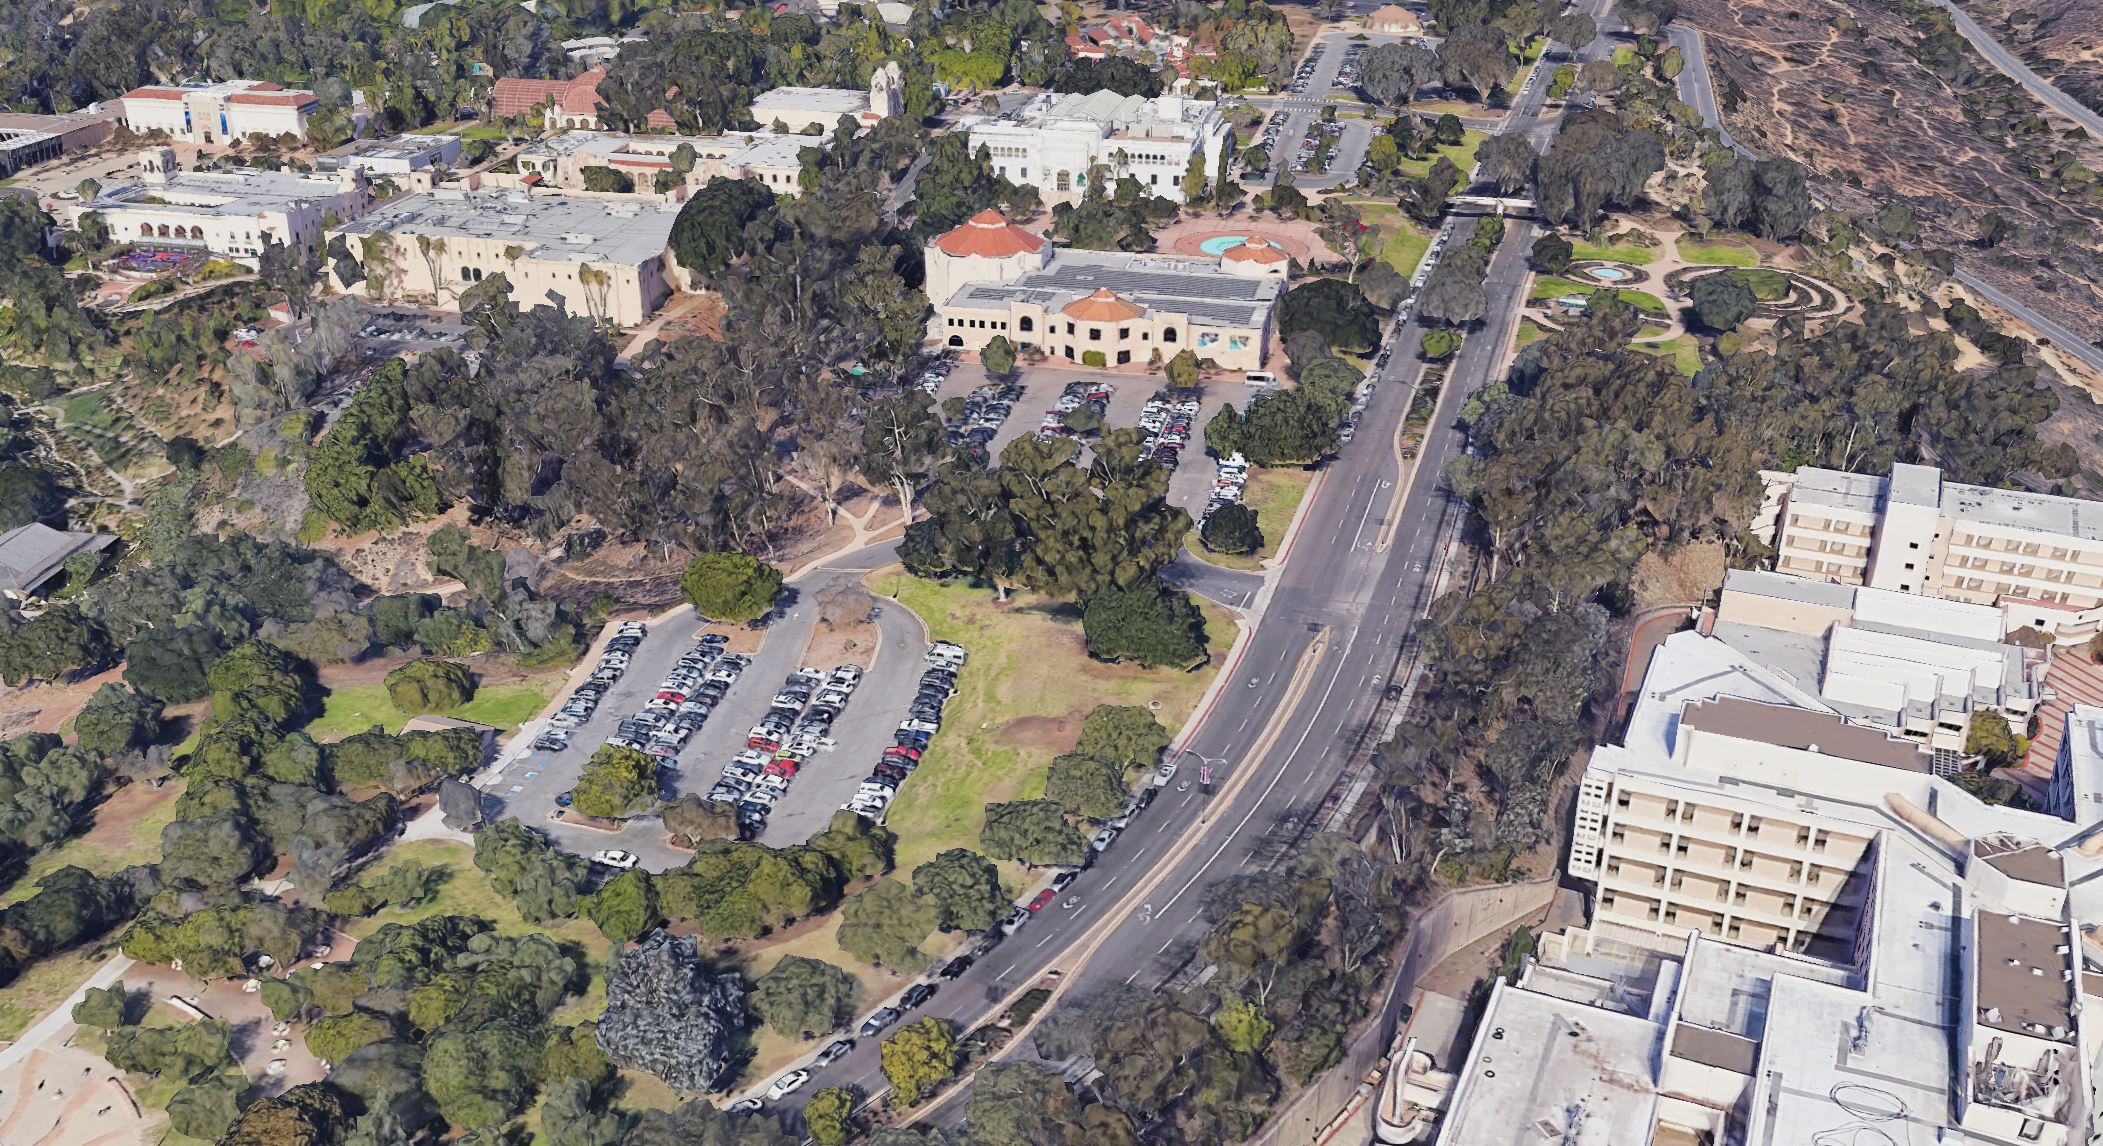 A Google Earth image shows Park Boulevard before restriping that would eliminate 300 street parking spaces from the area. 